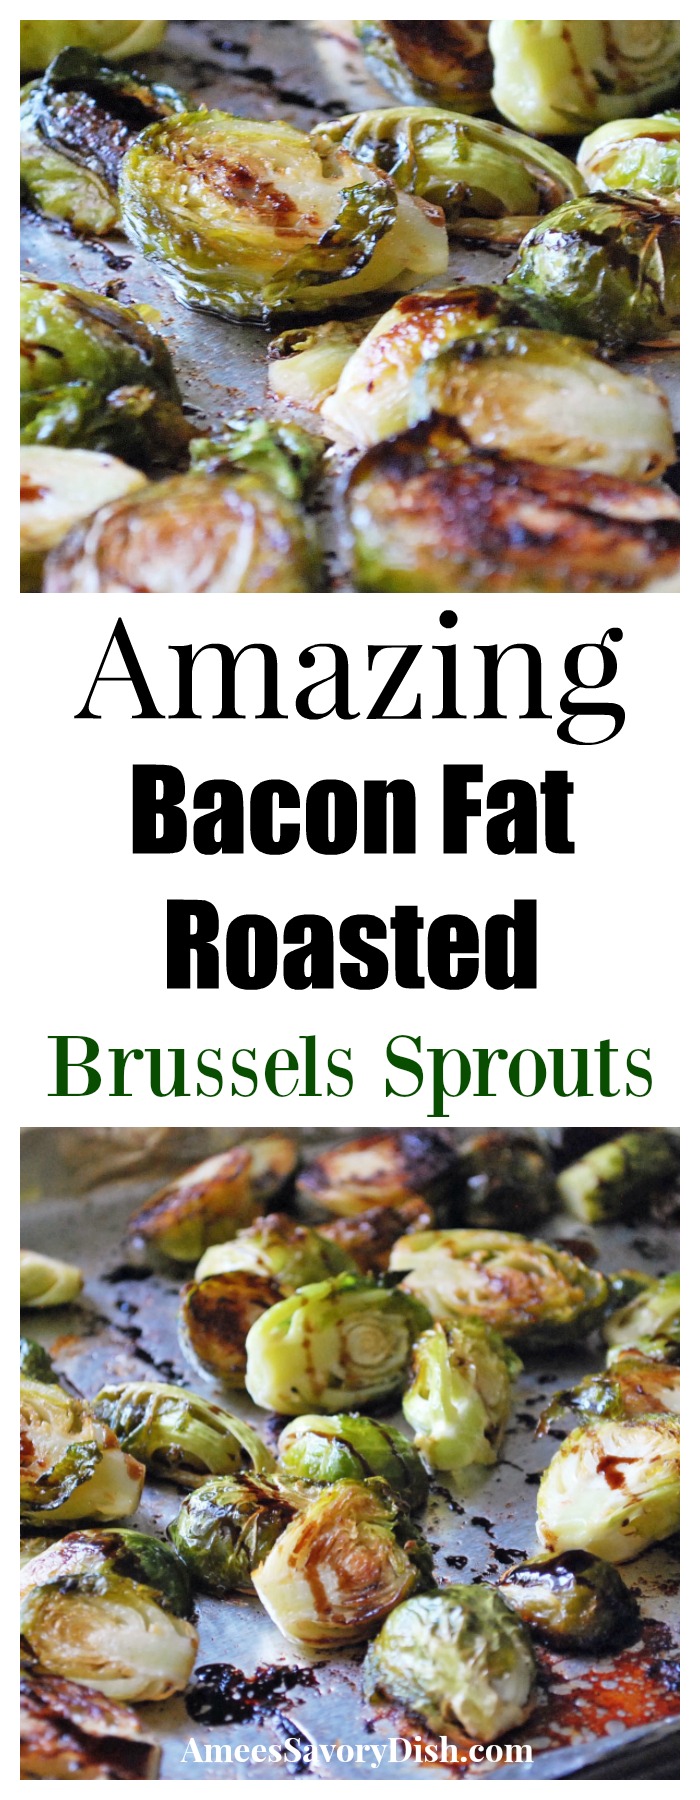 Amazing Bacon Fat Roasted Brussels Sprouts